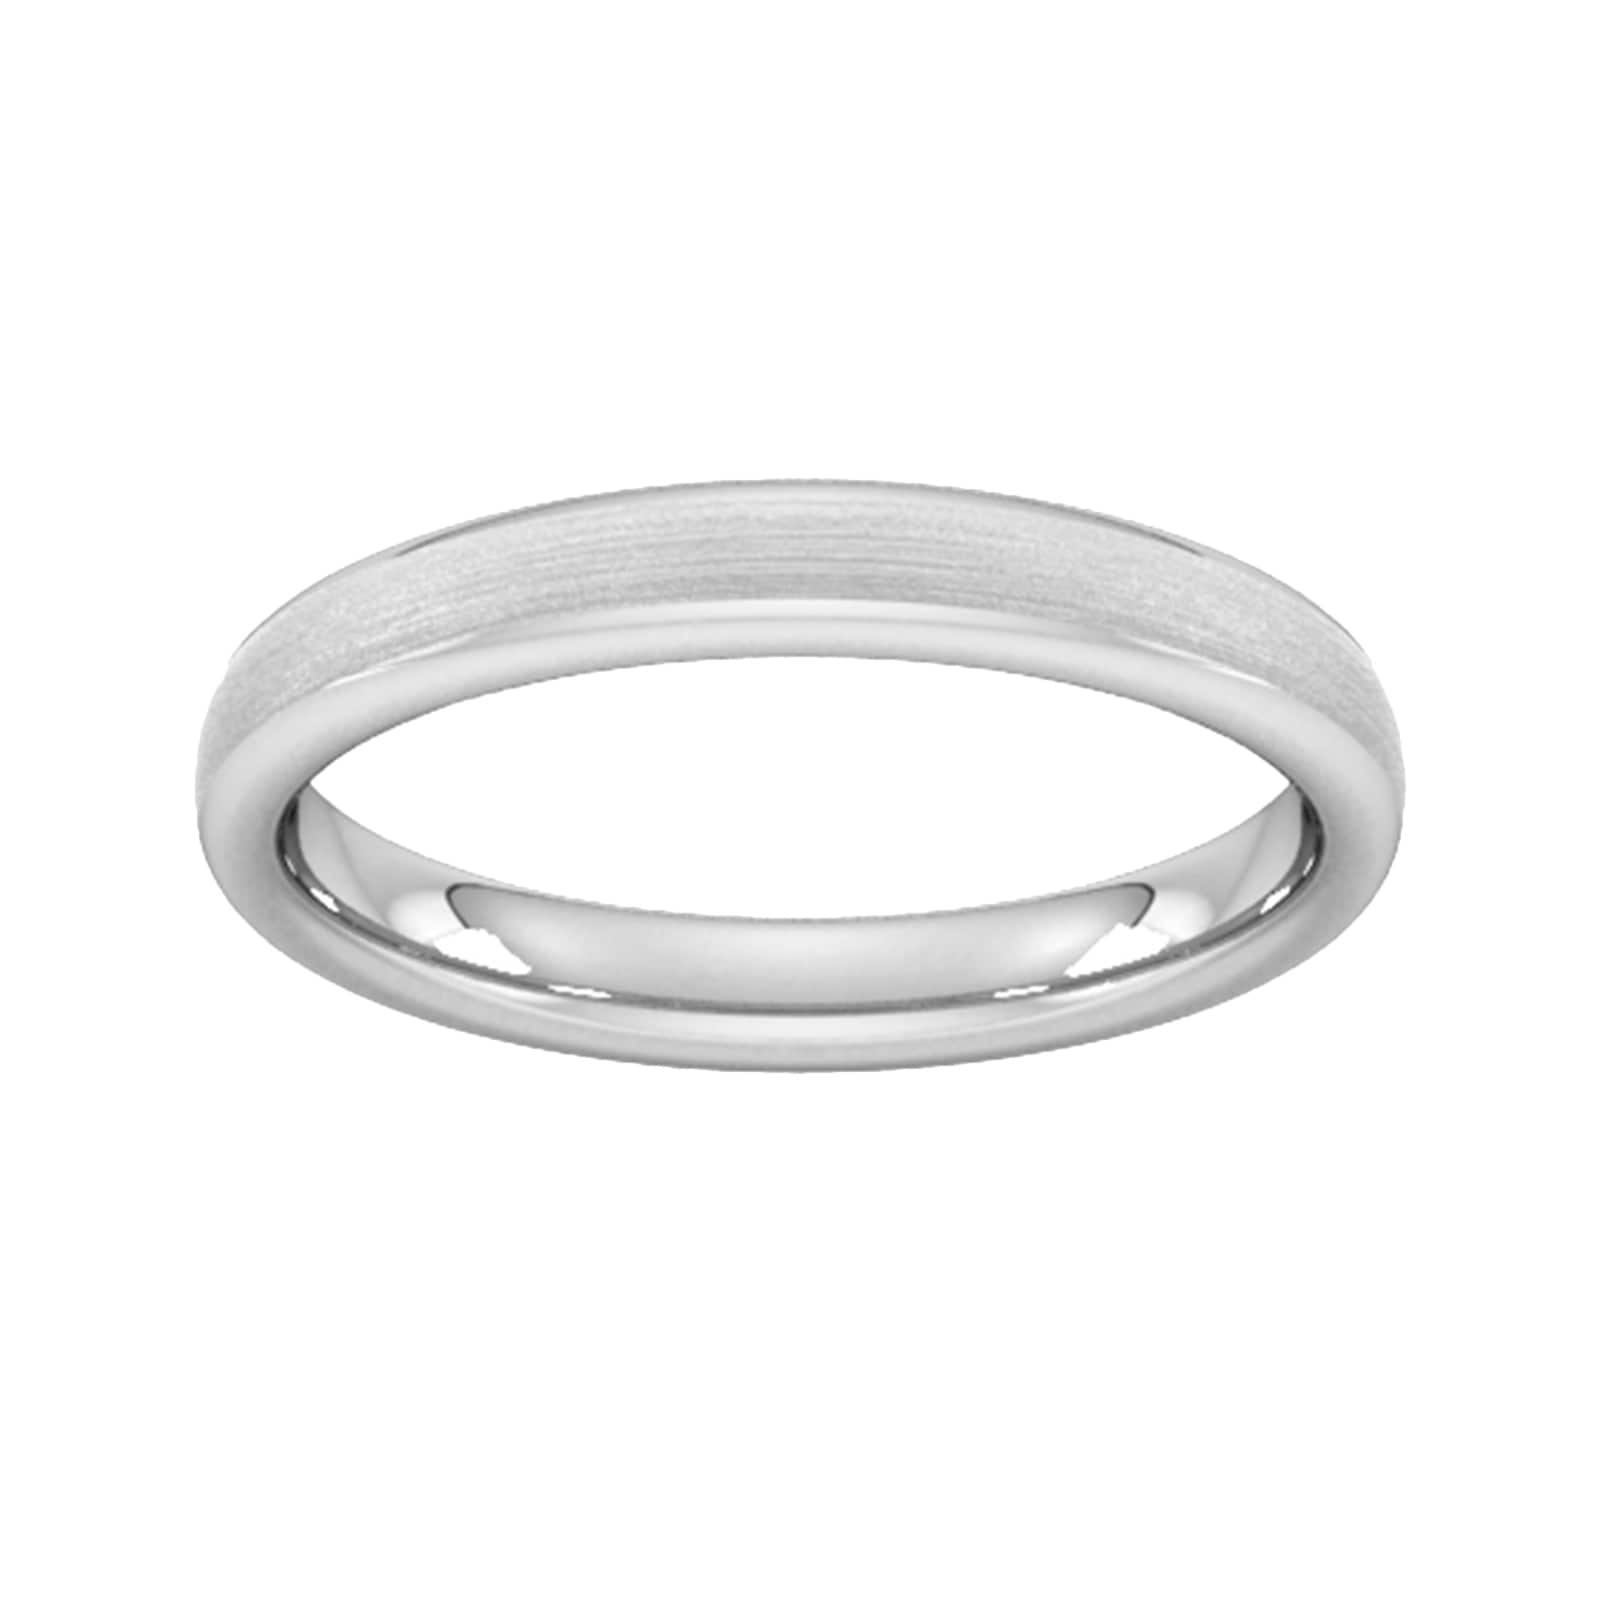 3mm Flat Court Heavy Matt Finished Wedding Ring In 18 Carat White Gold - Ring Size W